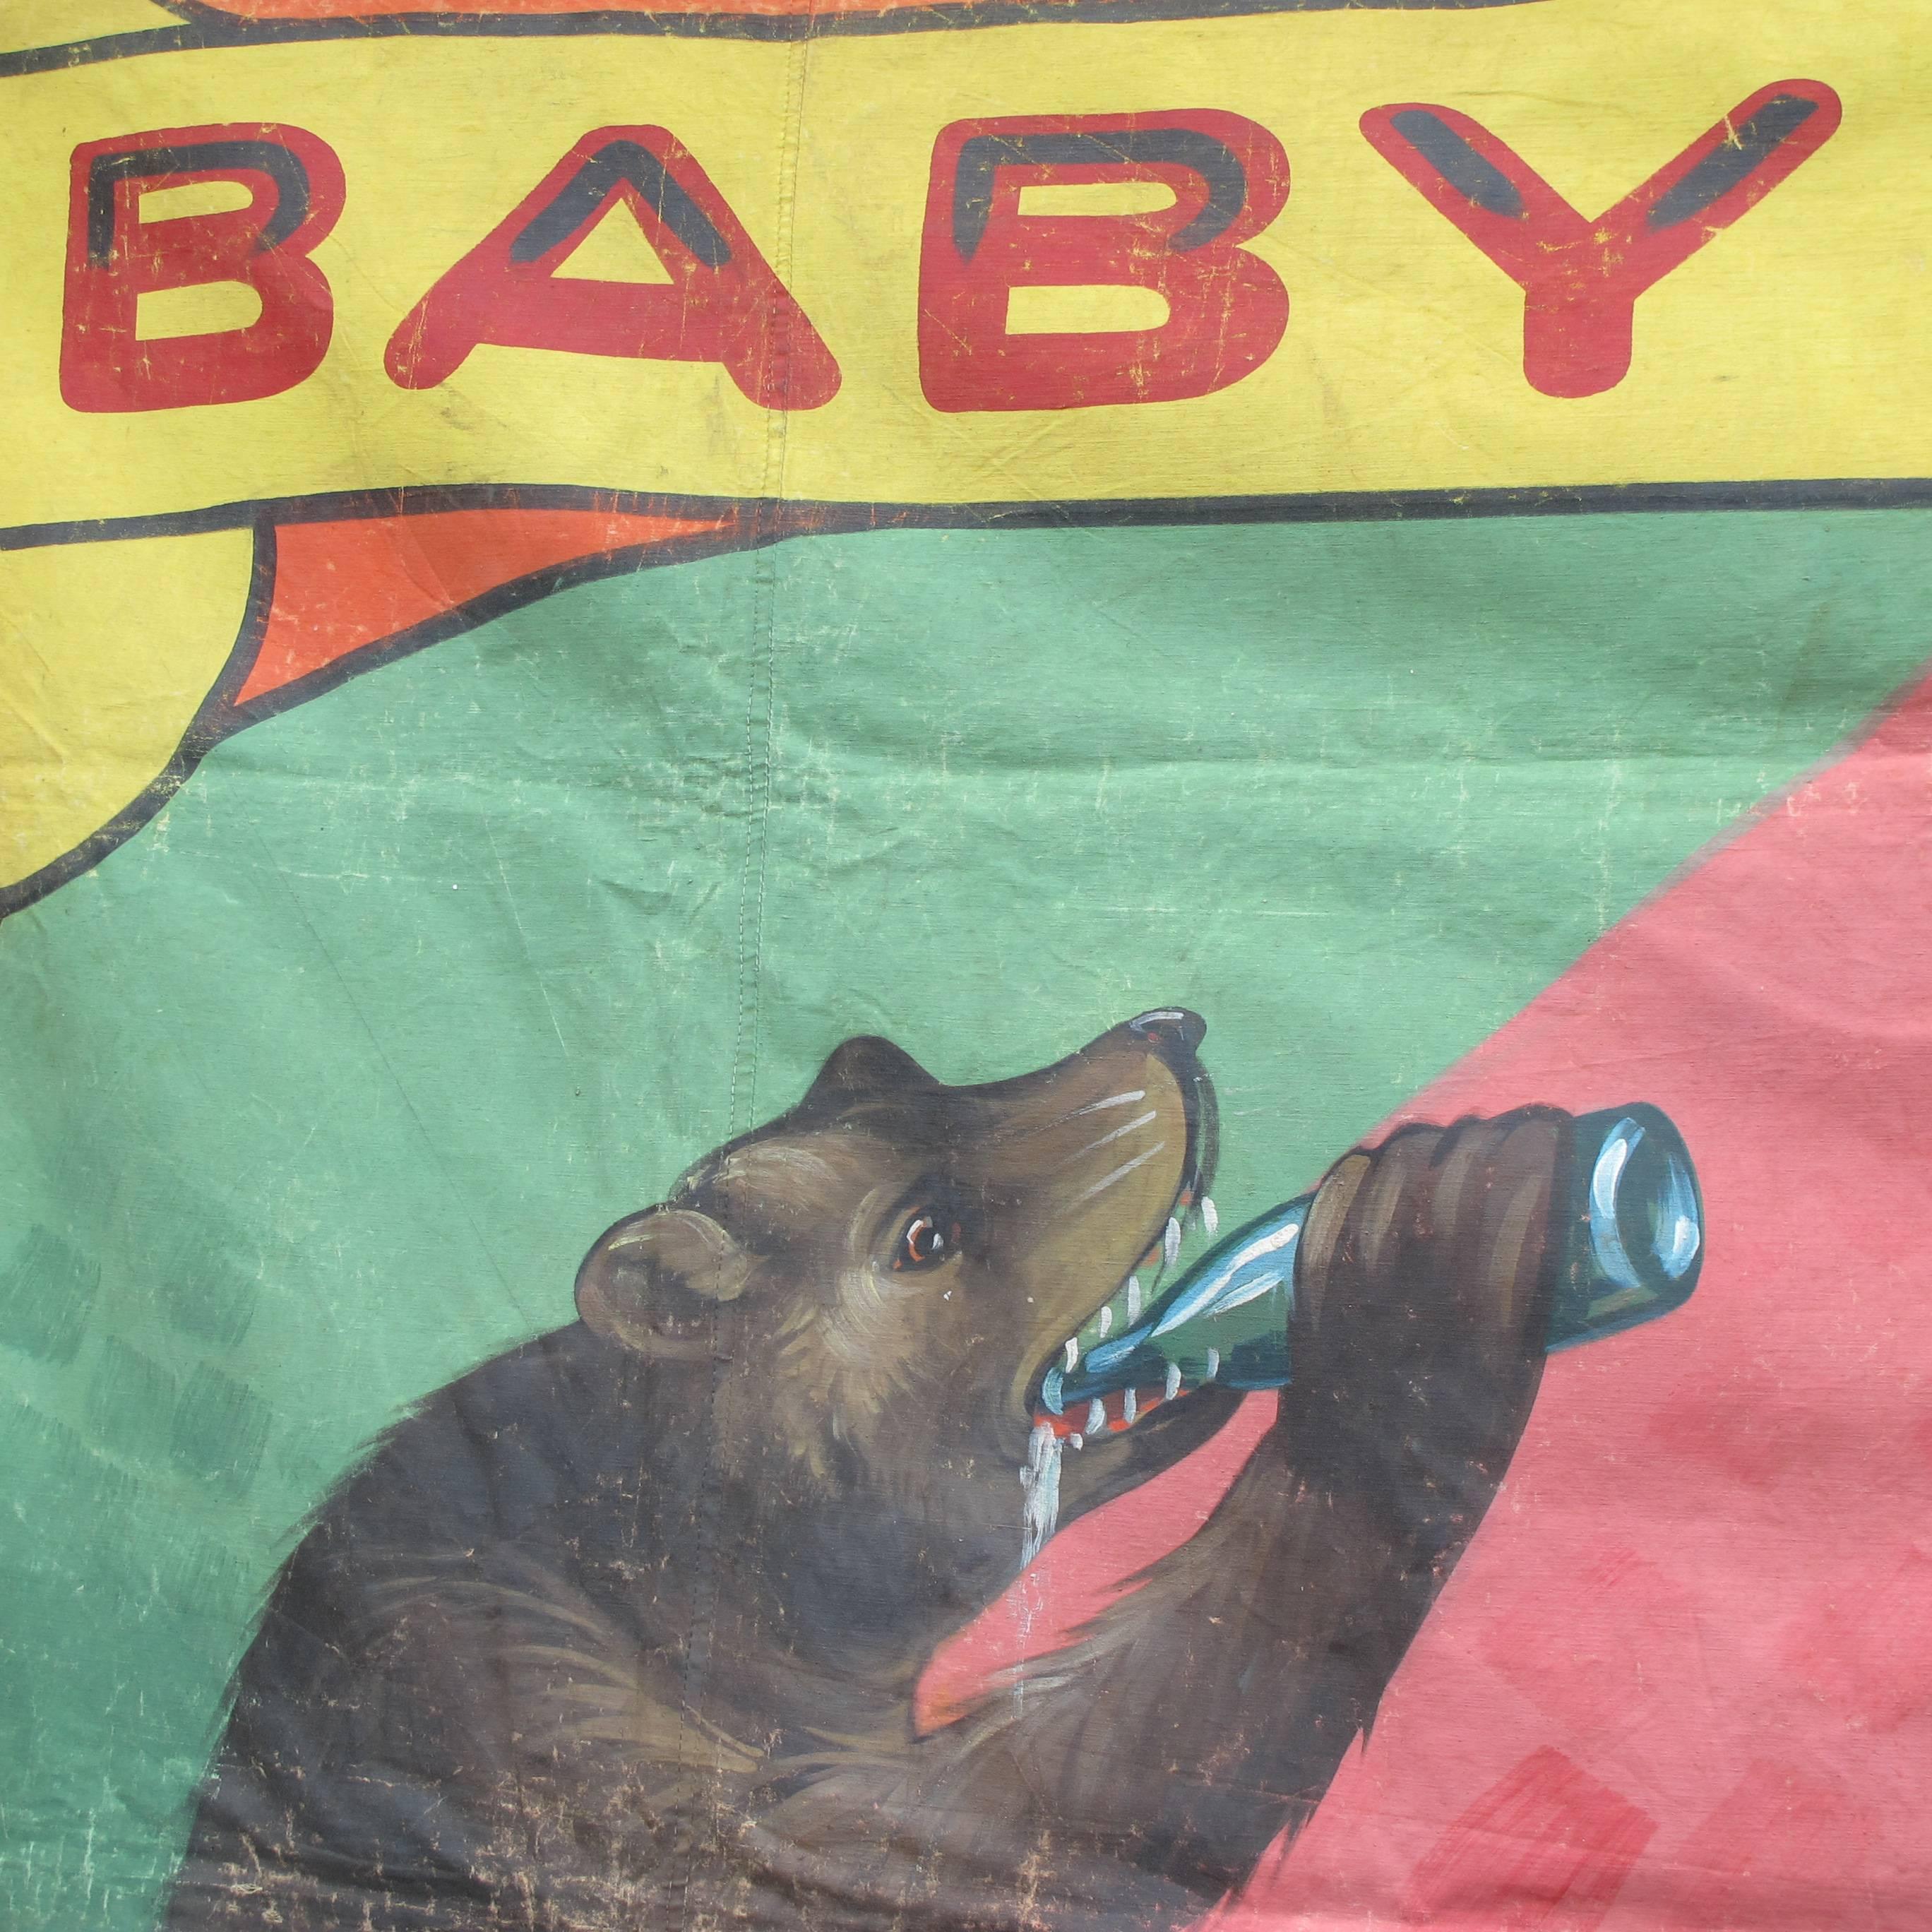 Painting on canvas tarp of baby bears drinking out of bottles. Attributed to the famous carnival sideshow painter Snap Wyatt (1905-1984). The banner has his distinctive lettering and combination of bright colors. This would look great in a bar area